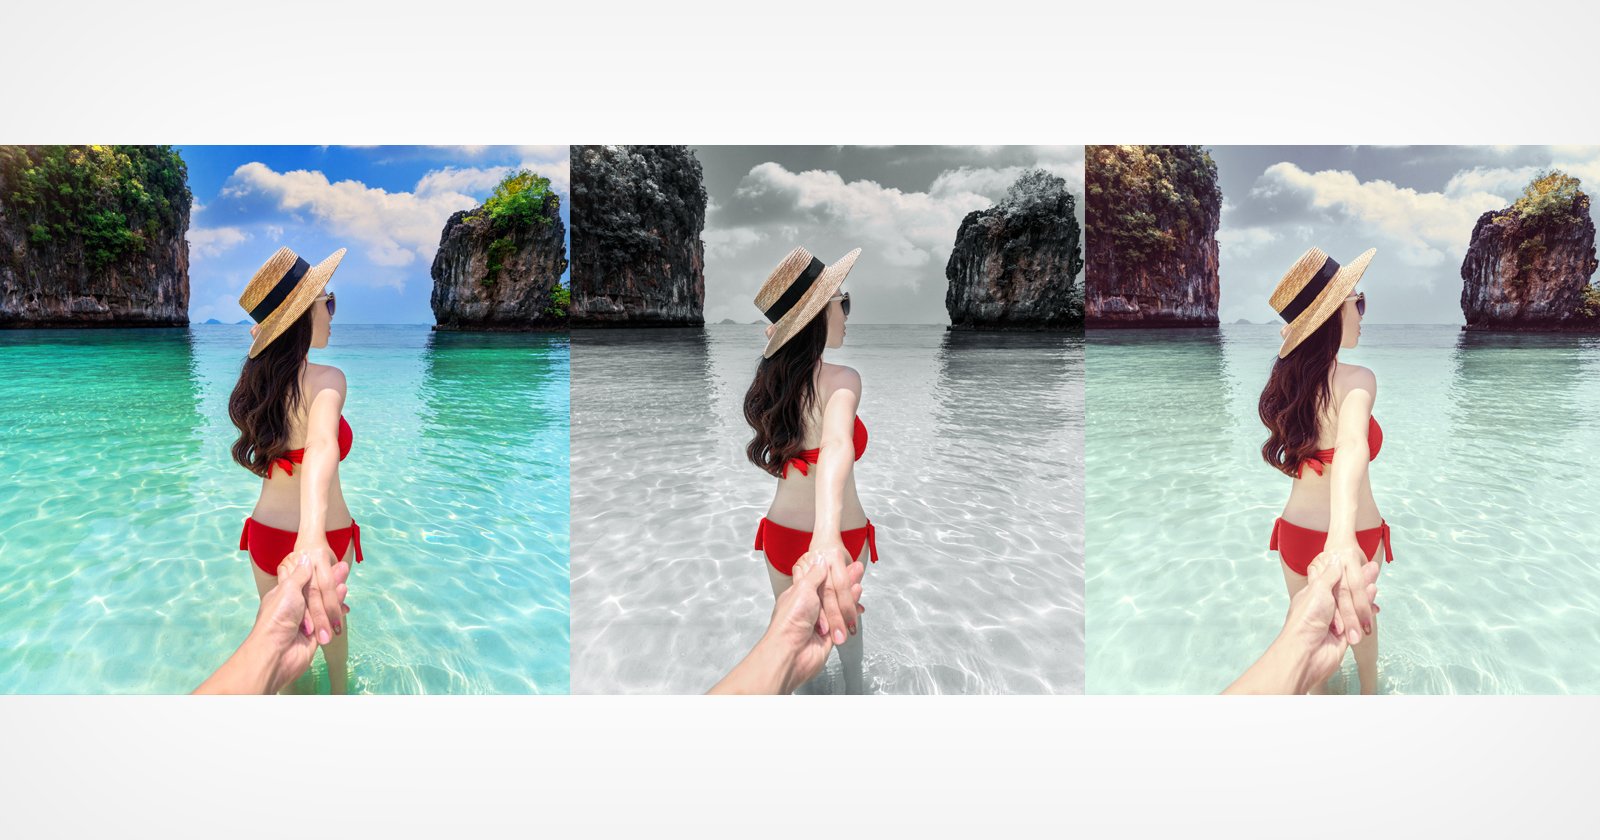  retouch4me photoshop plugin makes matching effortless 